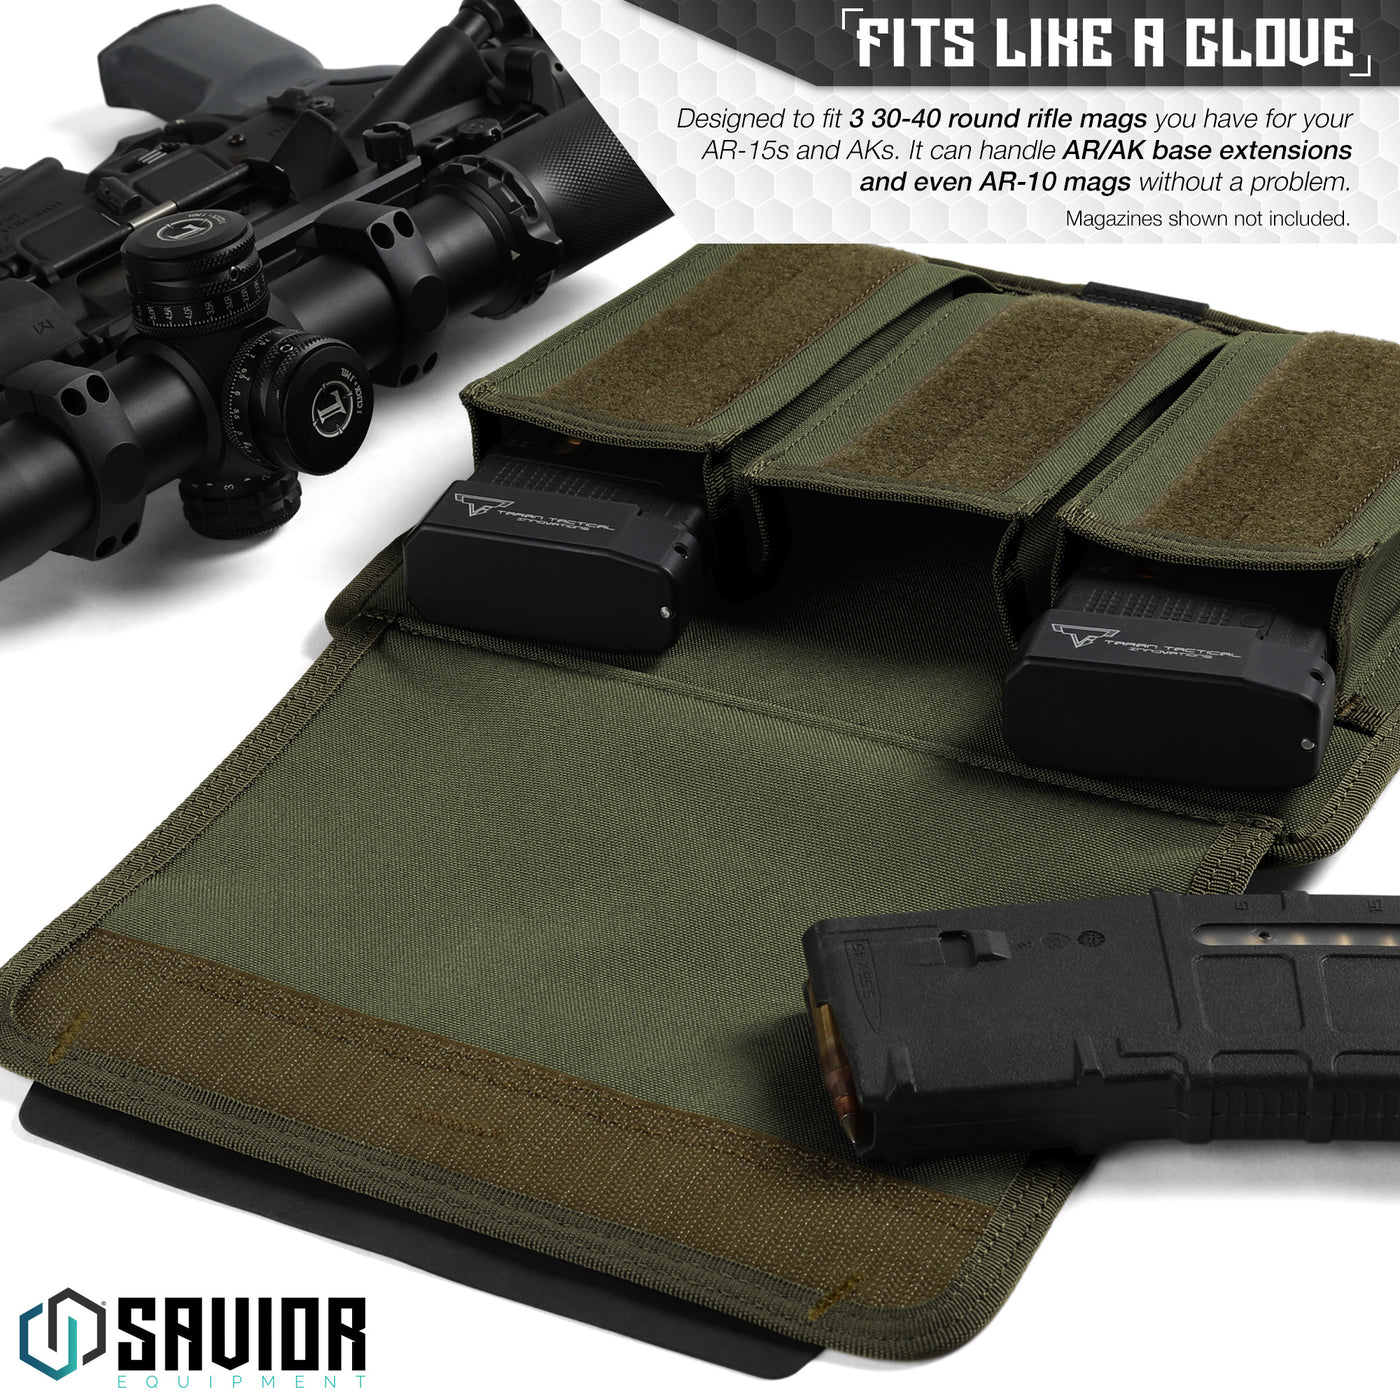 Fits Like A Glove - Designed to fit 3 30-40 round rifle mags you have for your AR-15s and AKs. It can handle AR/AK base extensions and even AR-10 mags without a problem. Firearms & magazines shown not included.